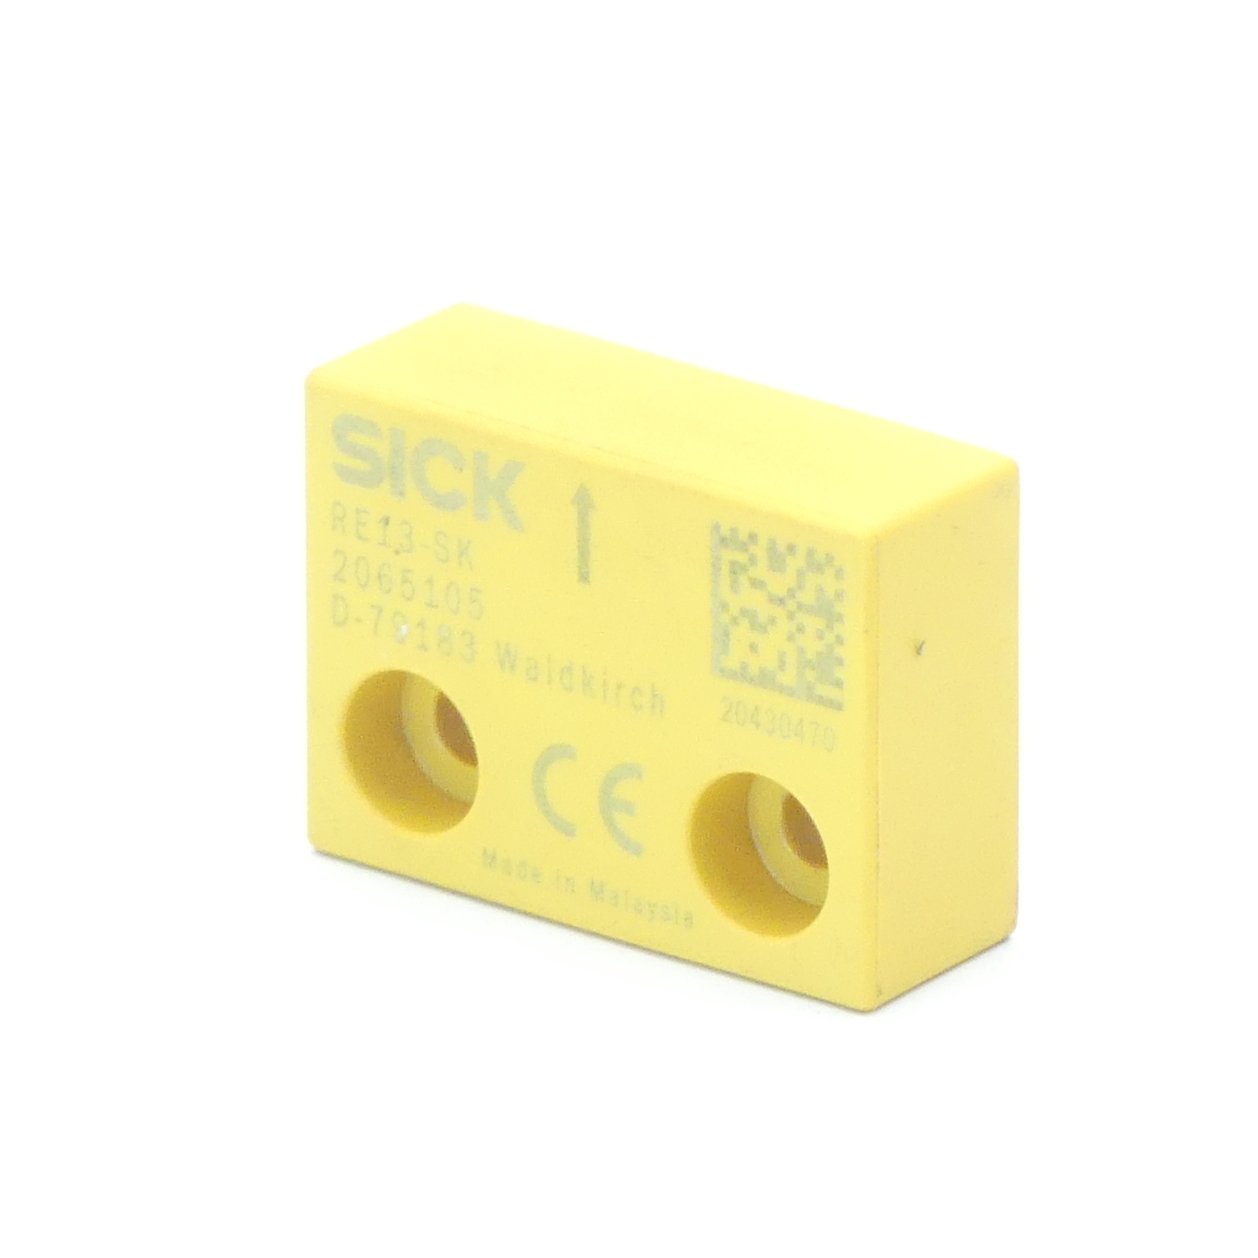 Safety switch RE13-SK 